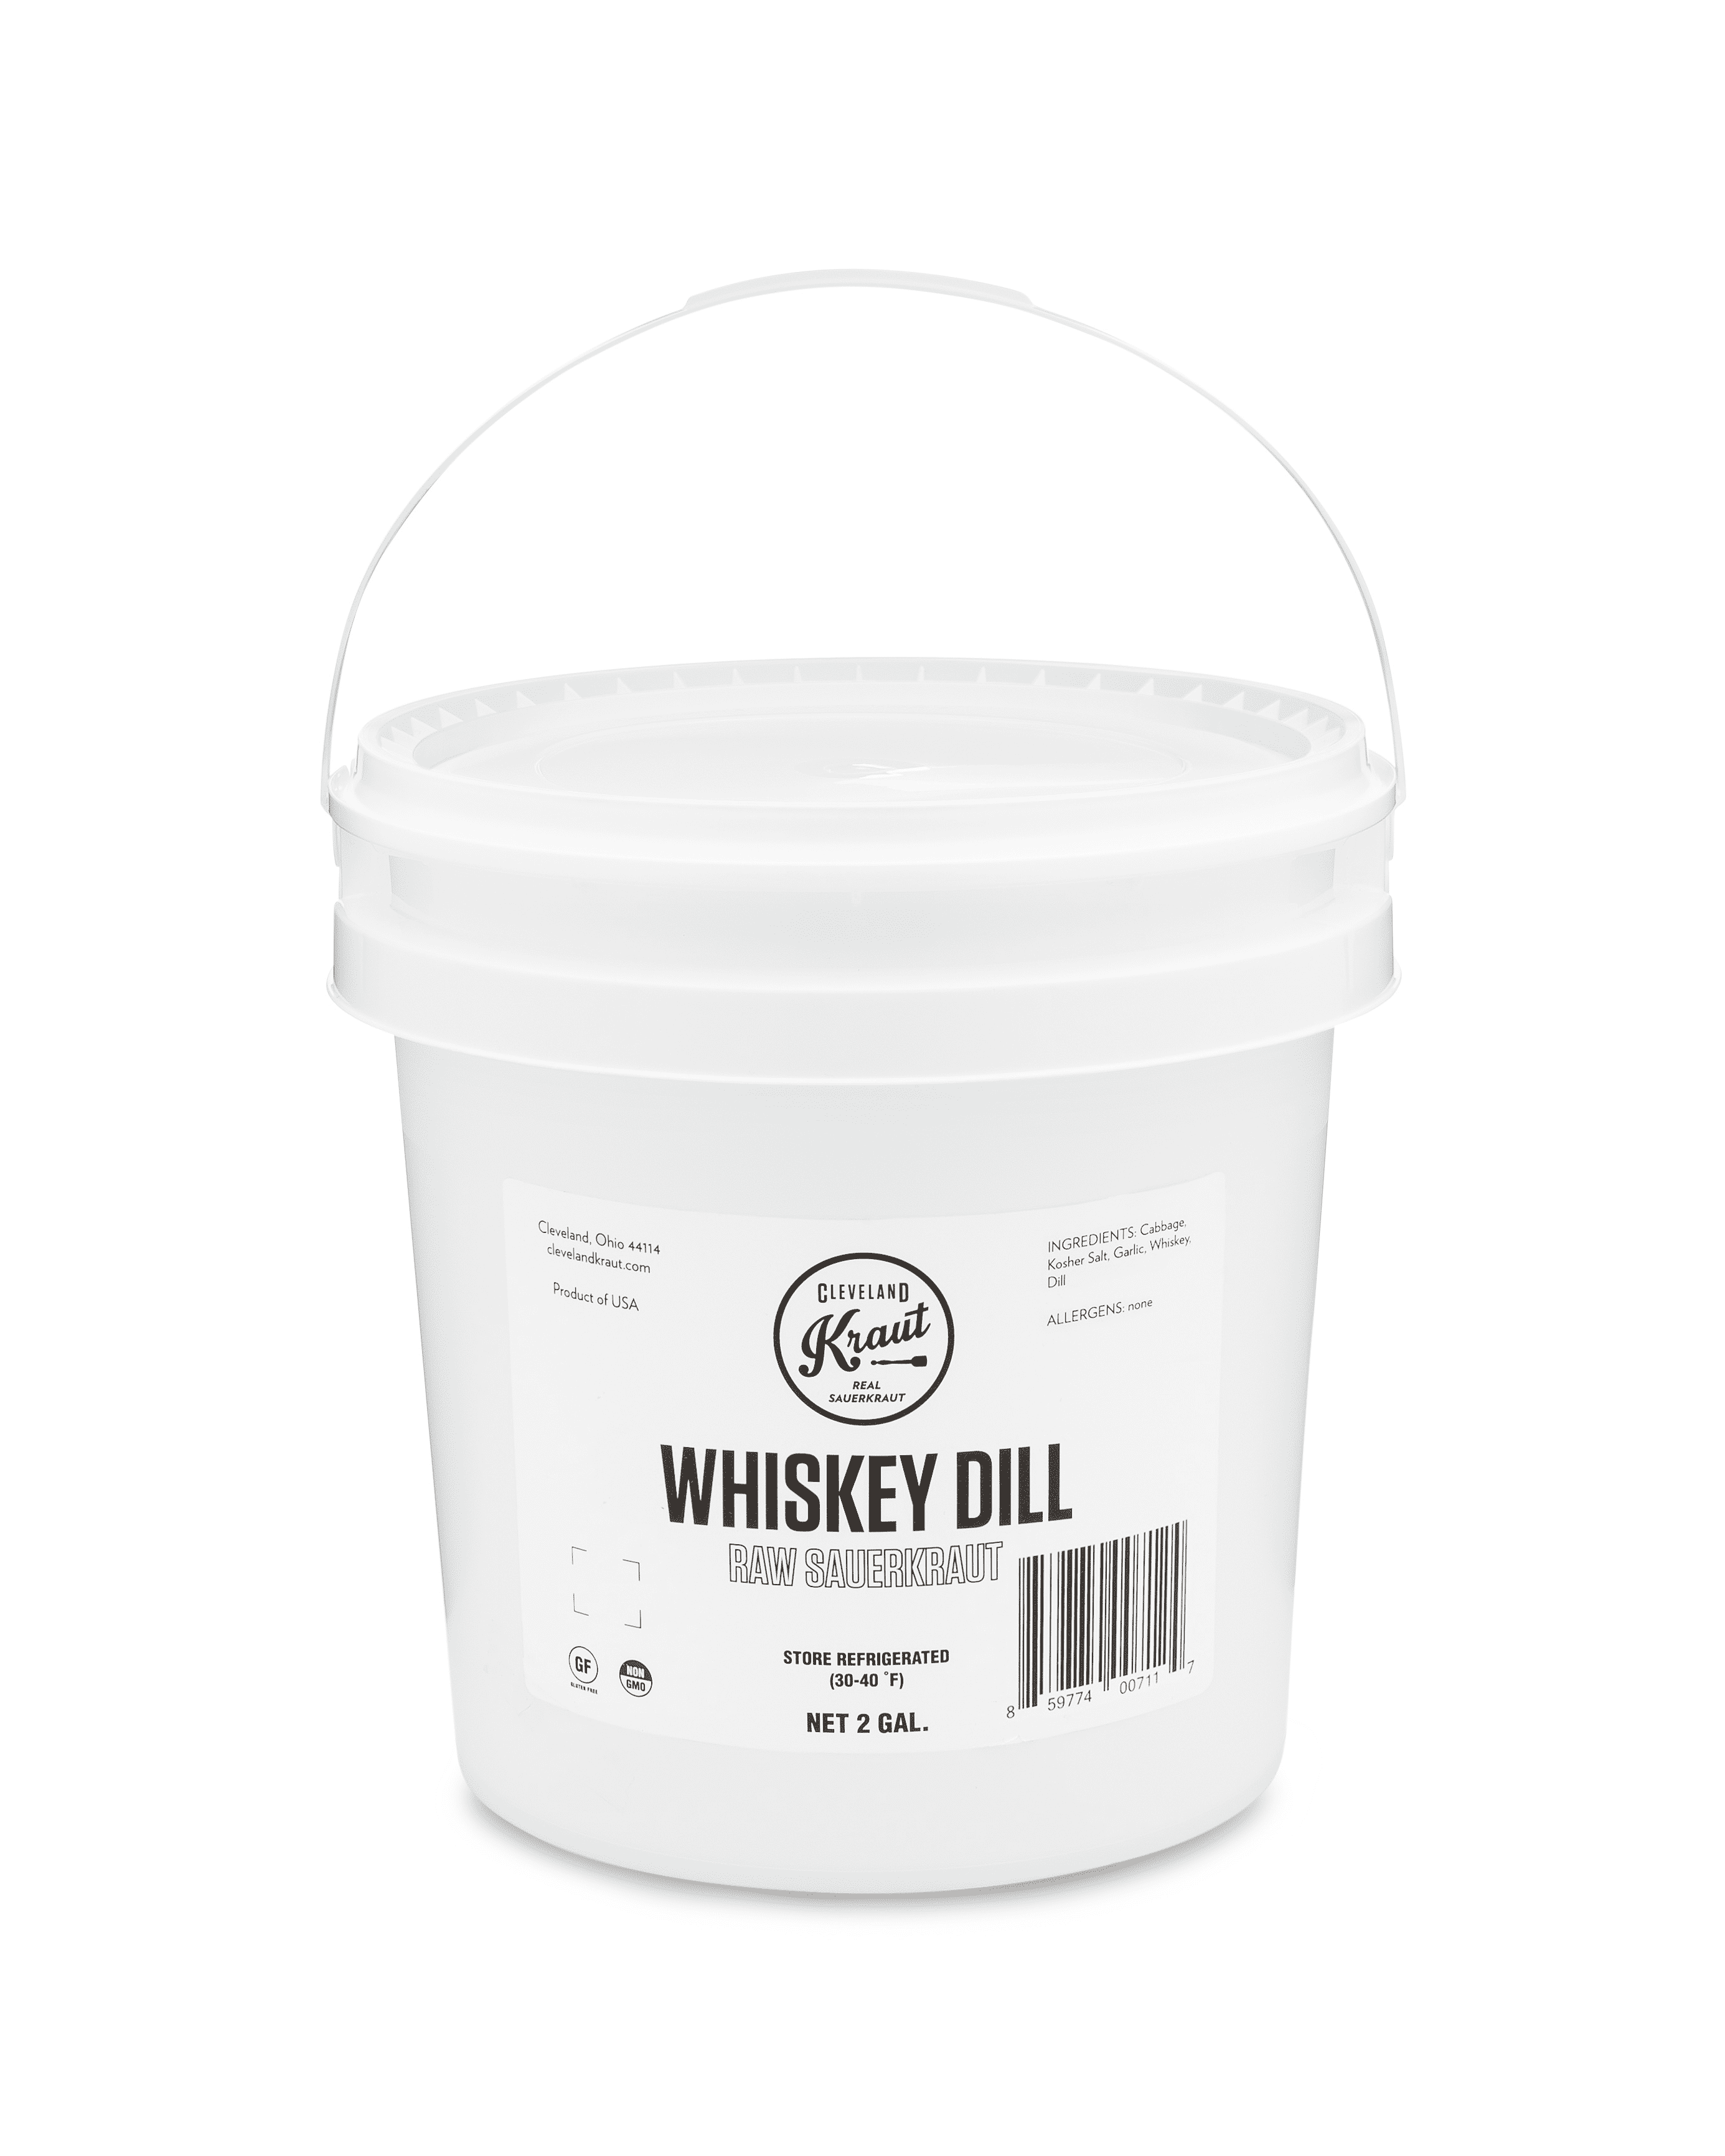 Cleveland Kitchen Whiskey Dill Kraut (2Gal, Foodservice) 1 units per case 2.0 gal